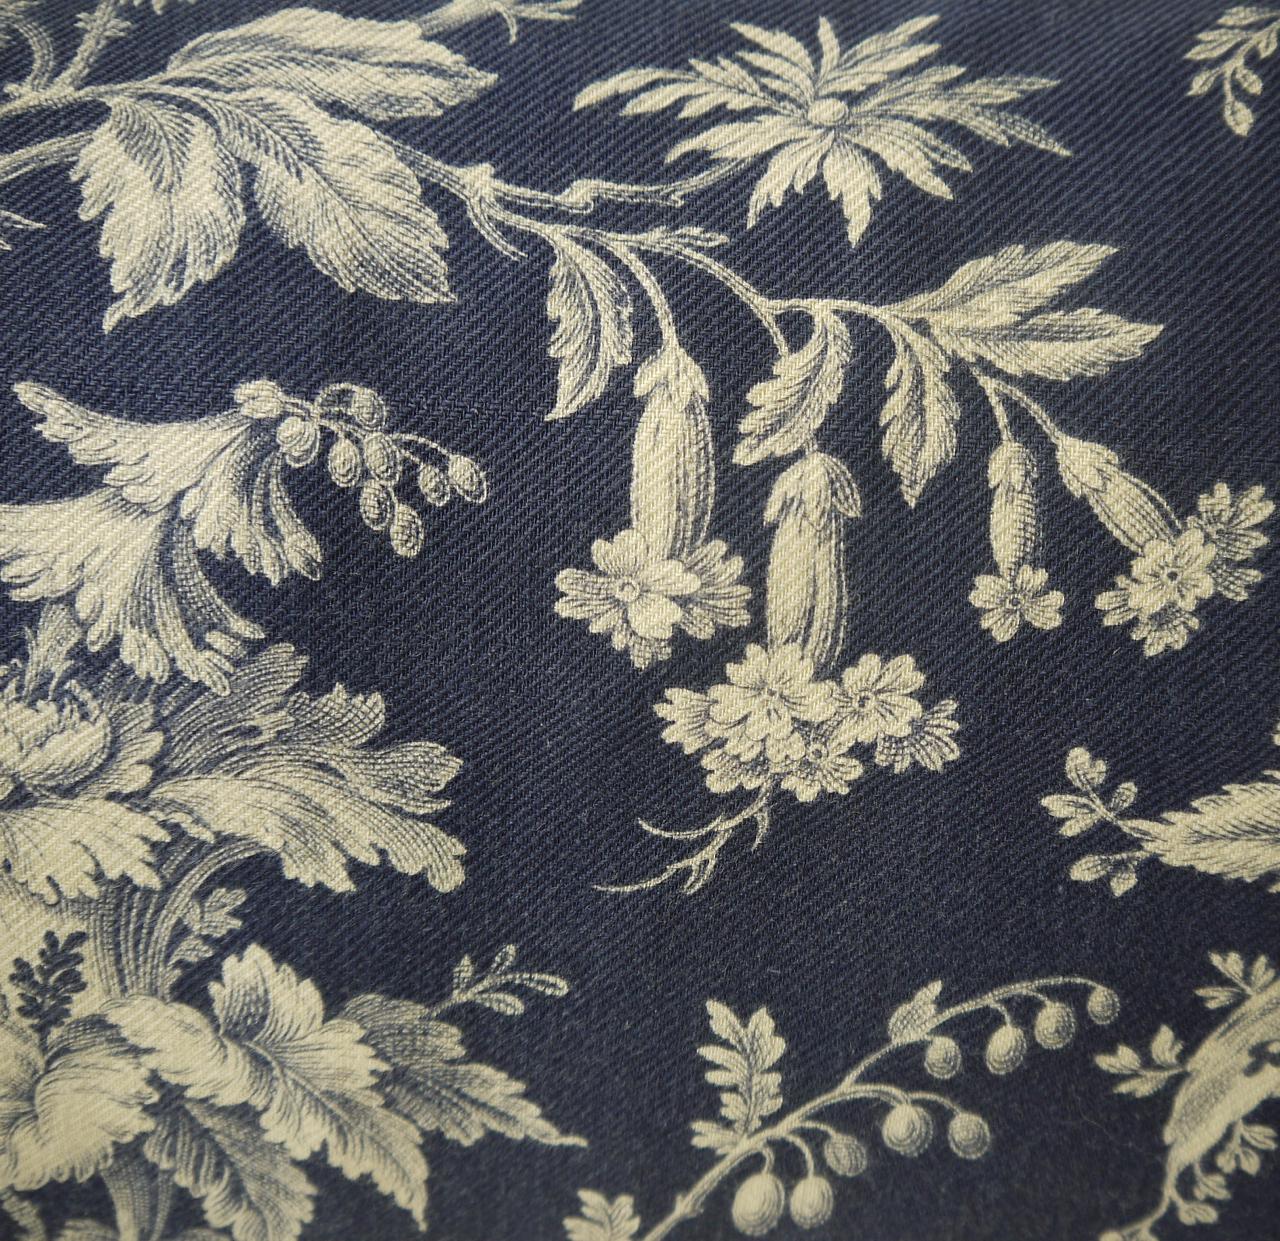 Later 19th century French printed cushion printed with a design of exotic flowers and meandering branches on textured cotton. With 19th century French cotton tassels at each corner. Self-backed and slip-stitched closed with a duck feather insert.